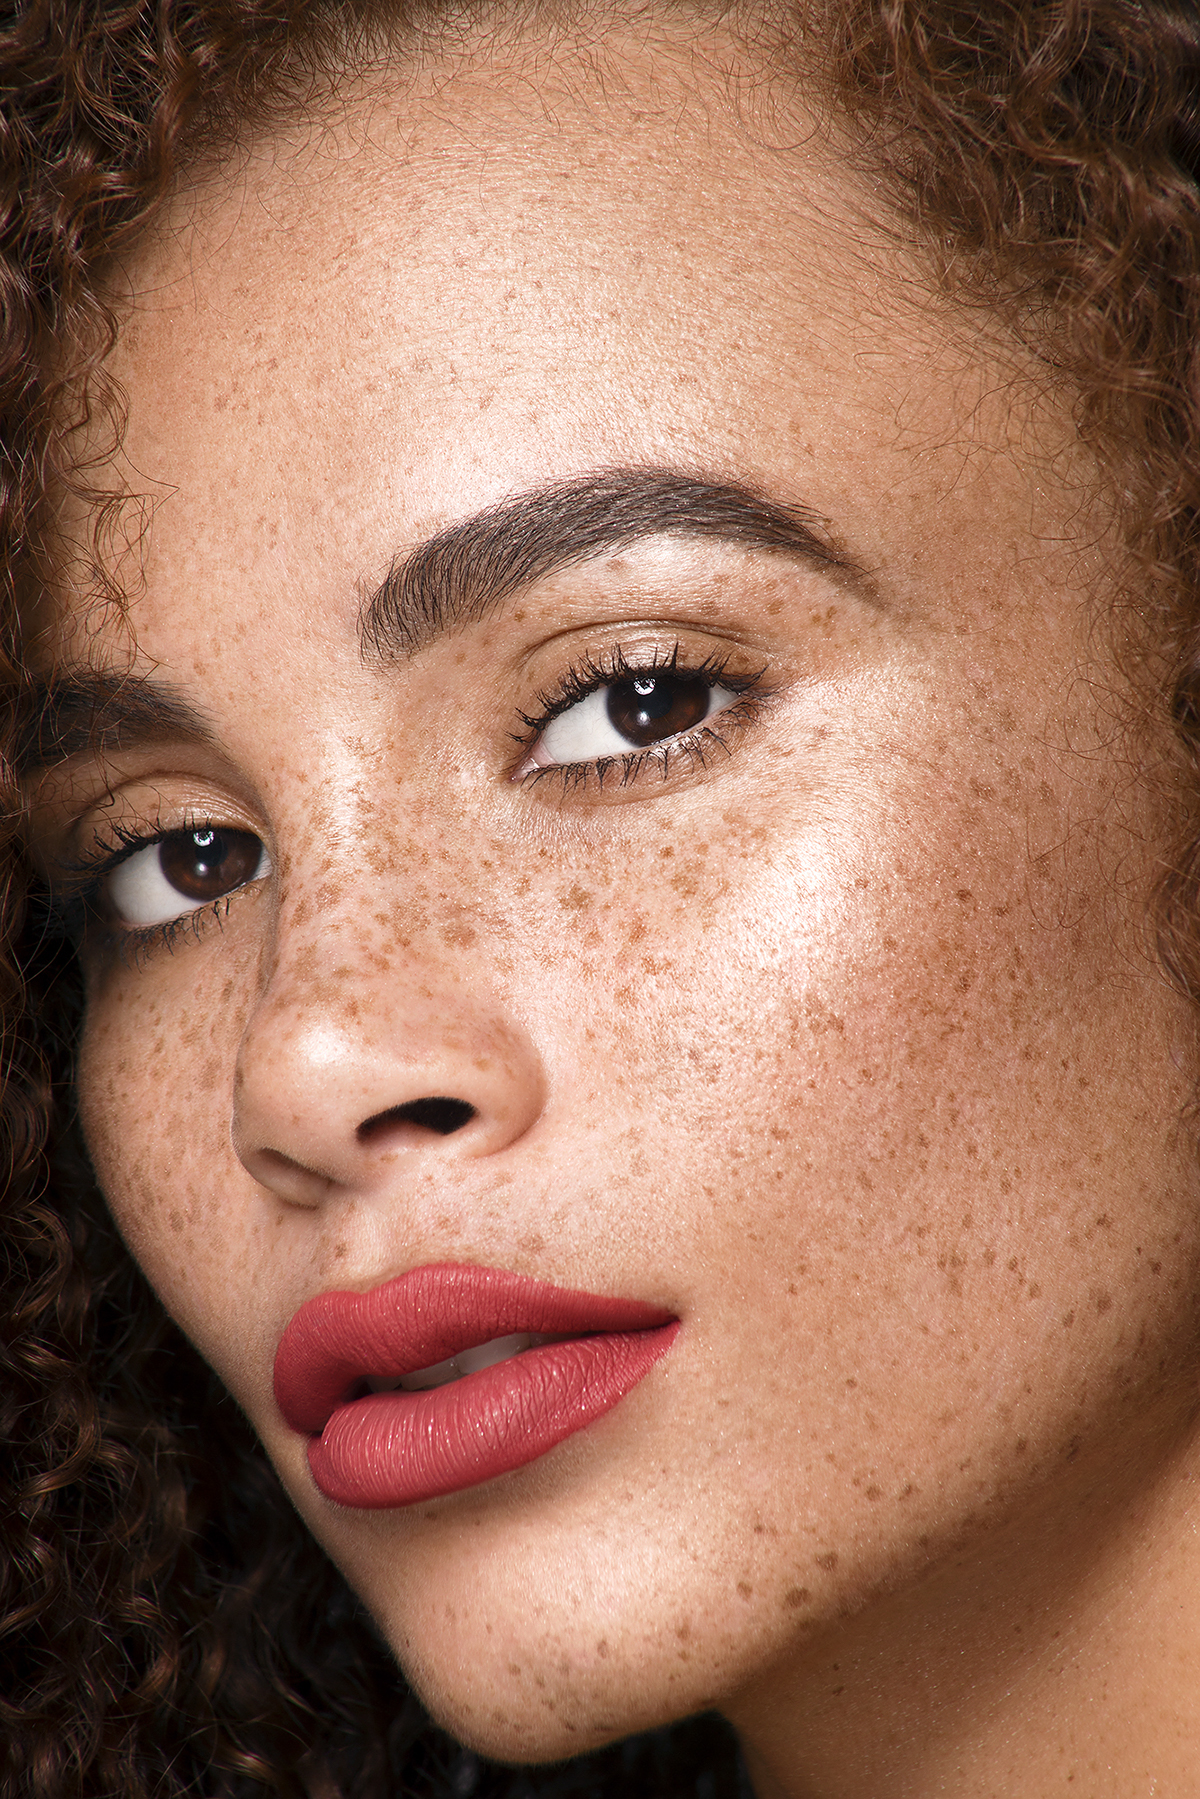 abg recommends mixed girl with freckles pic